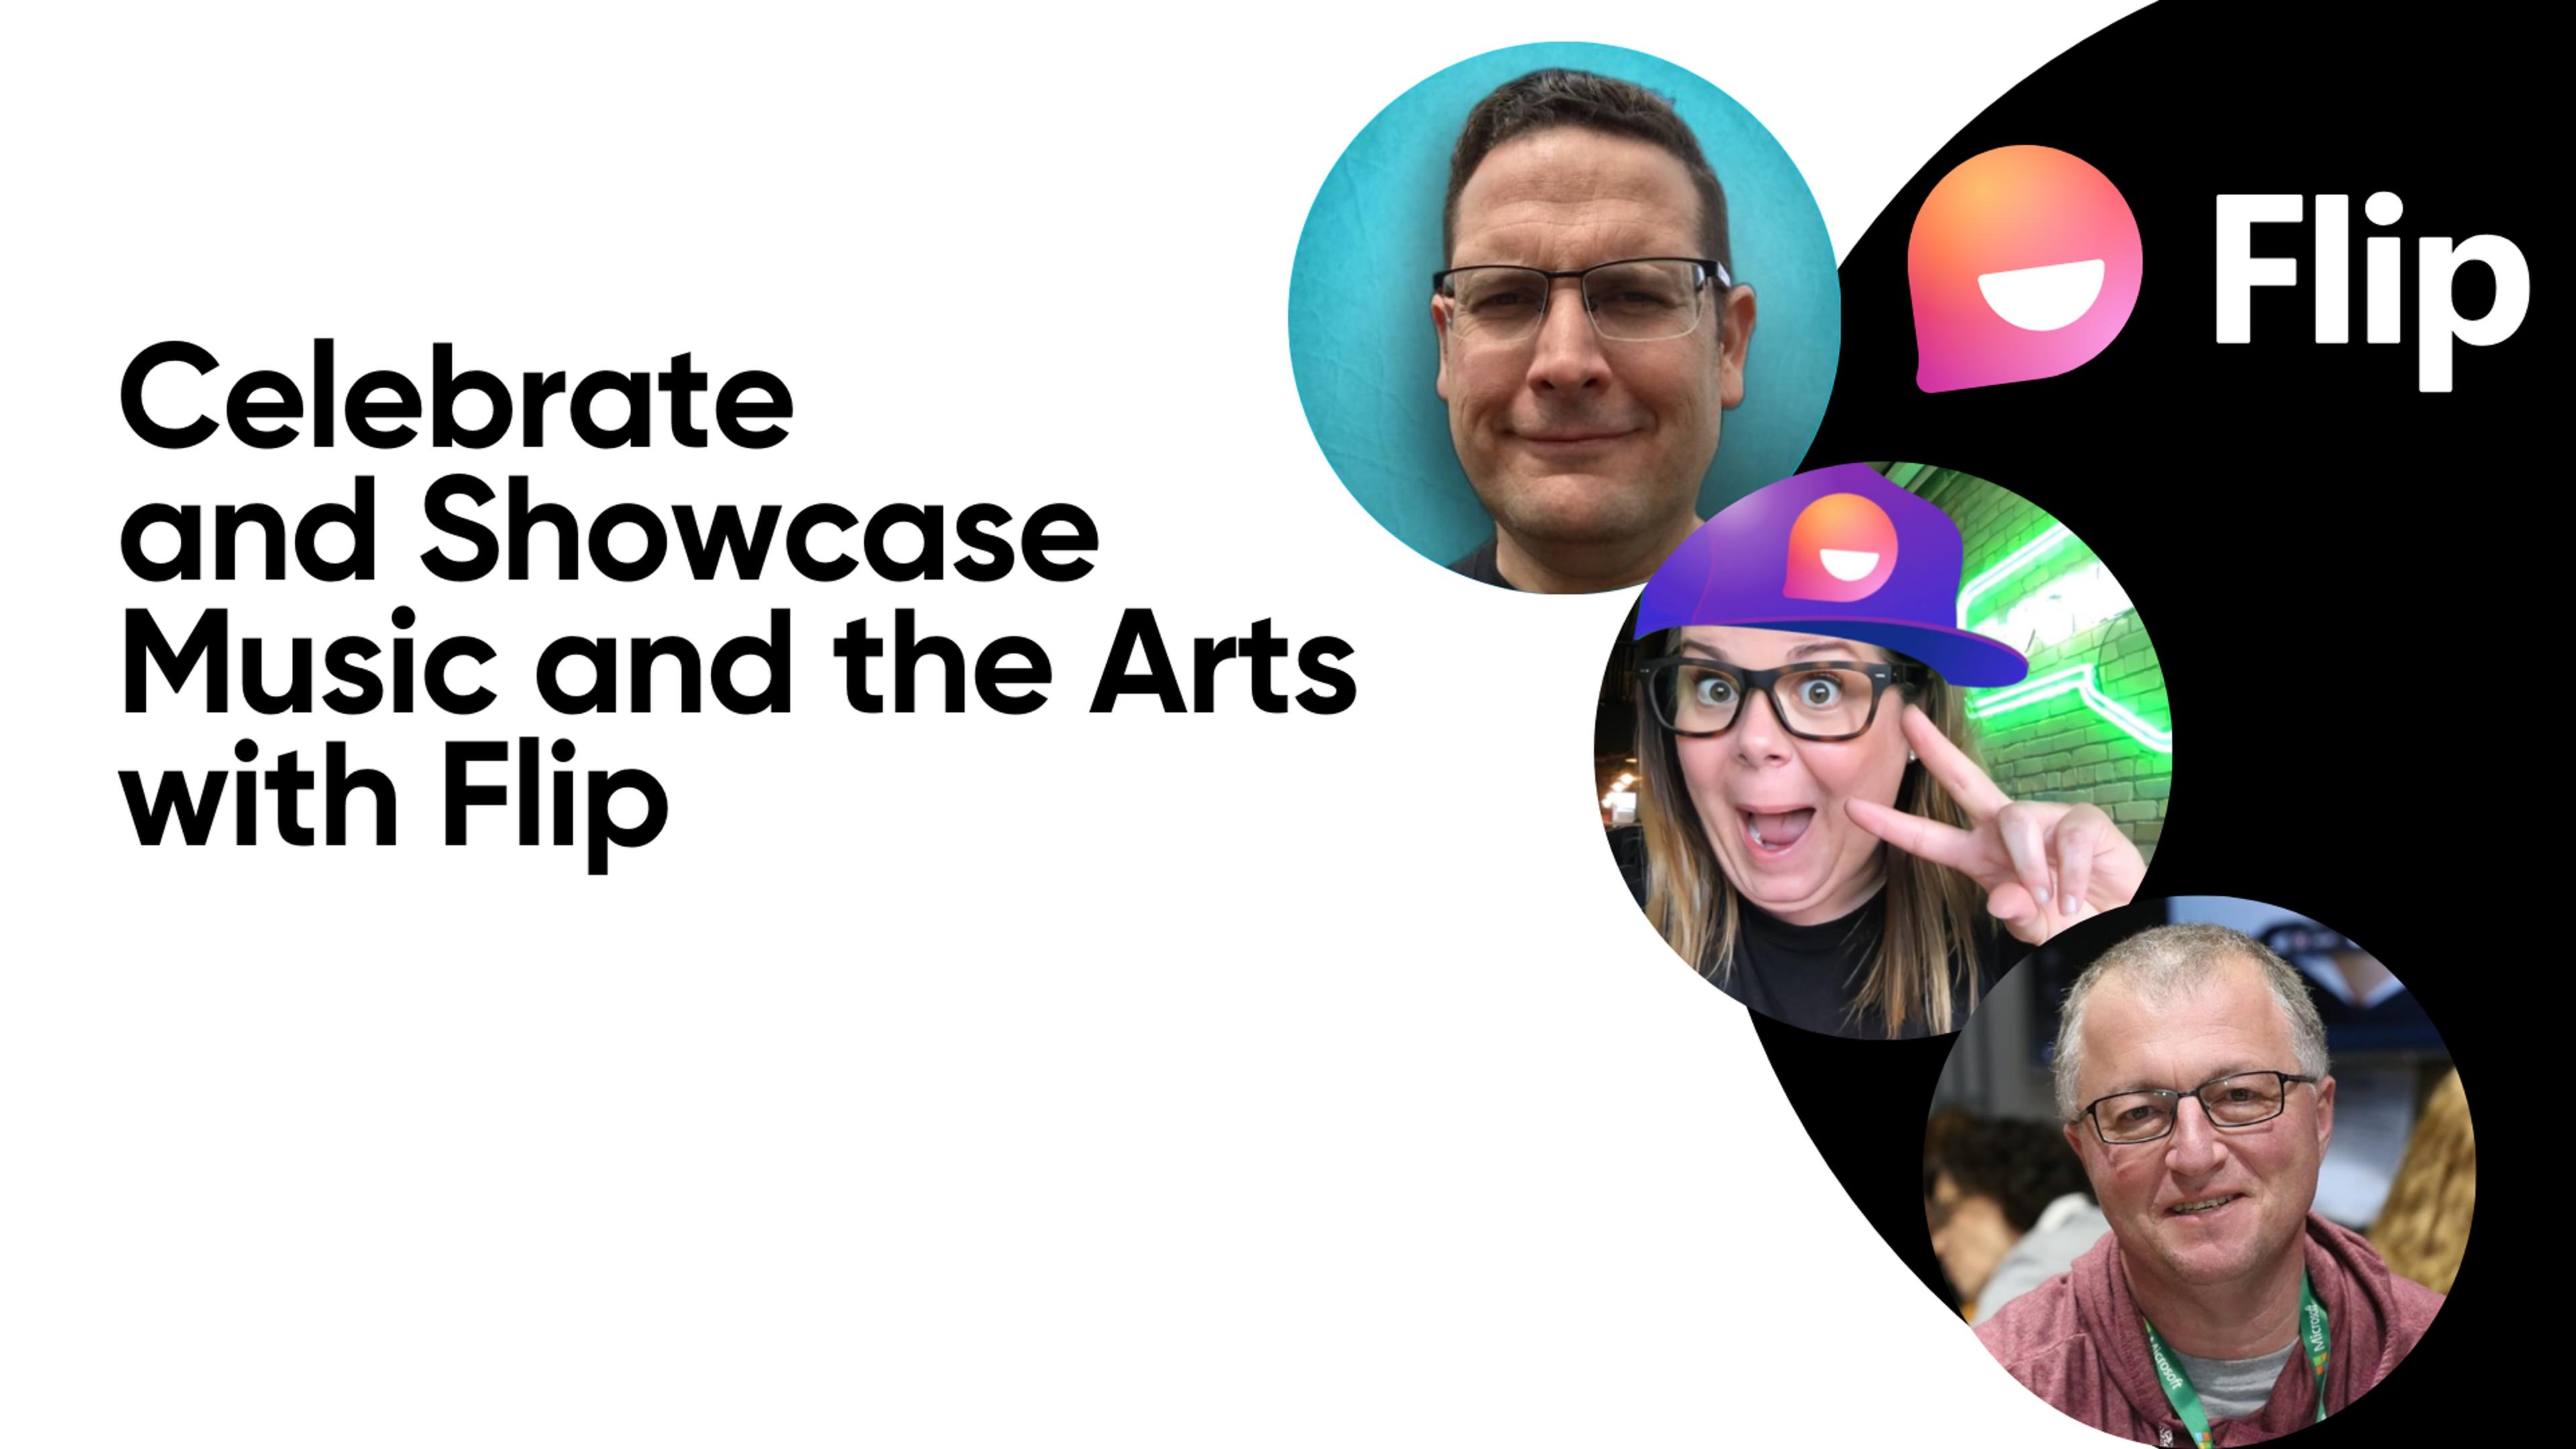 Celebrate and Showcase Music and the Arts with Flip